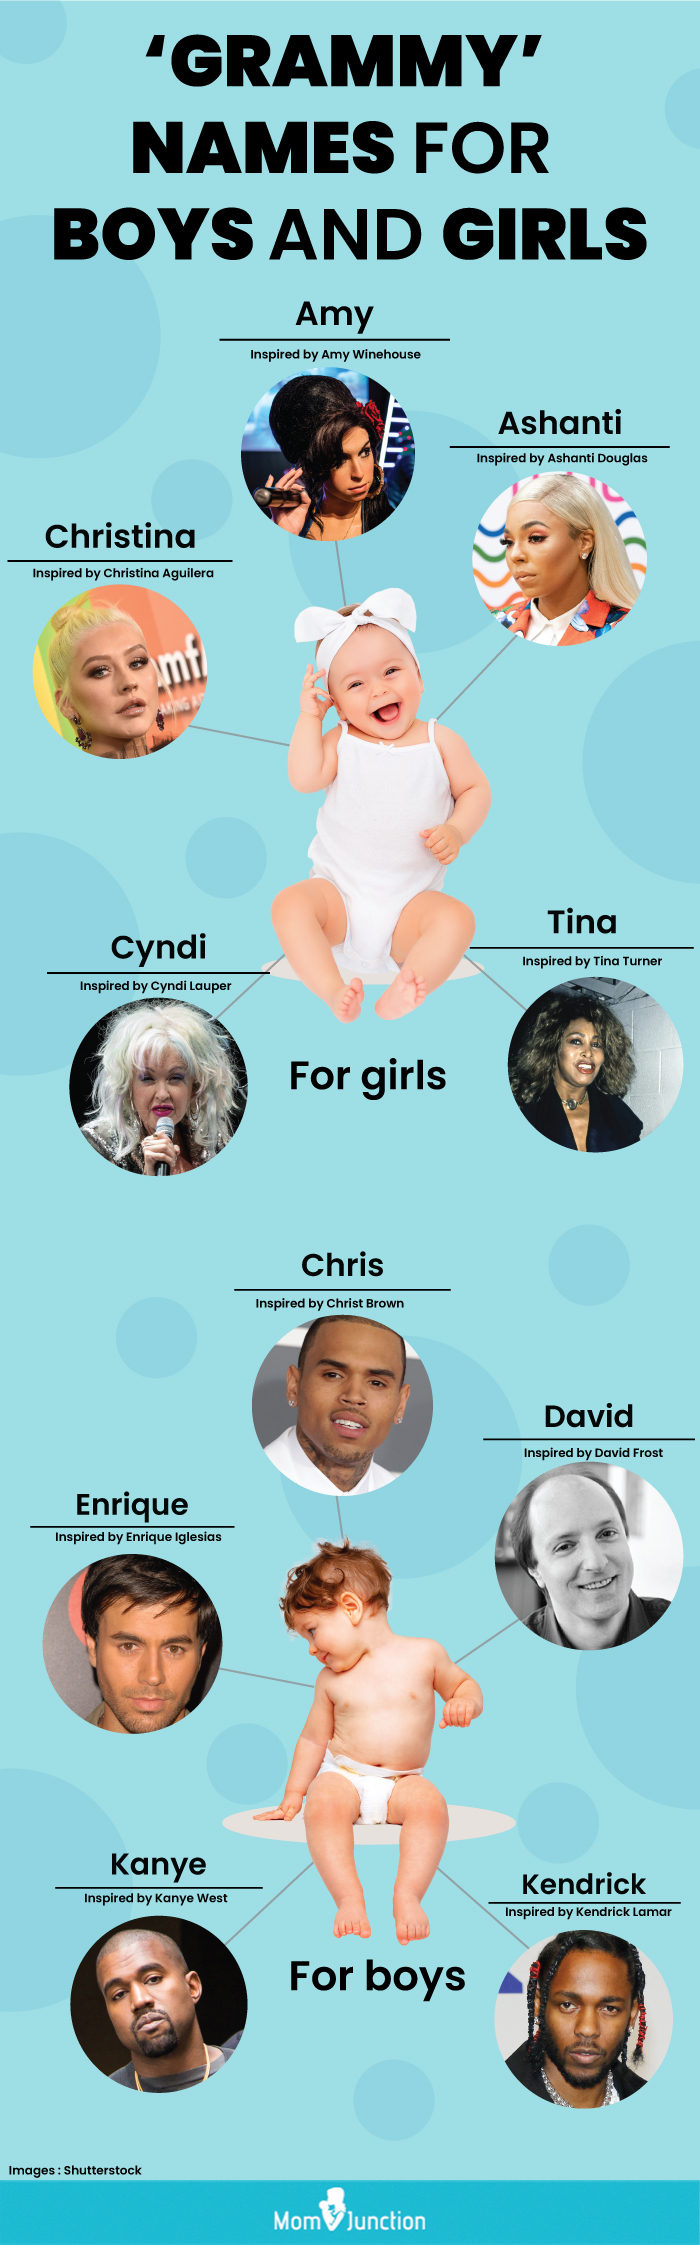 grammy names for boys and girls [infographic]